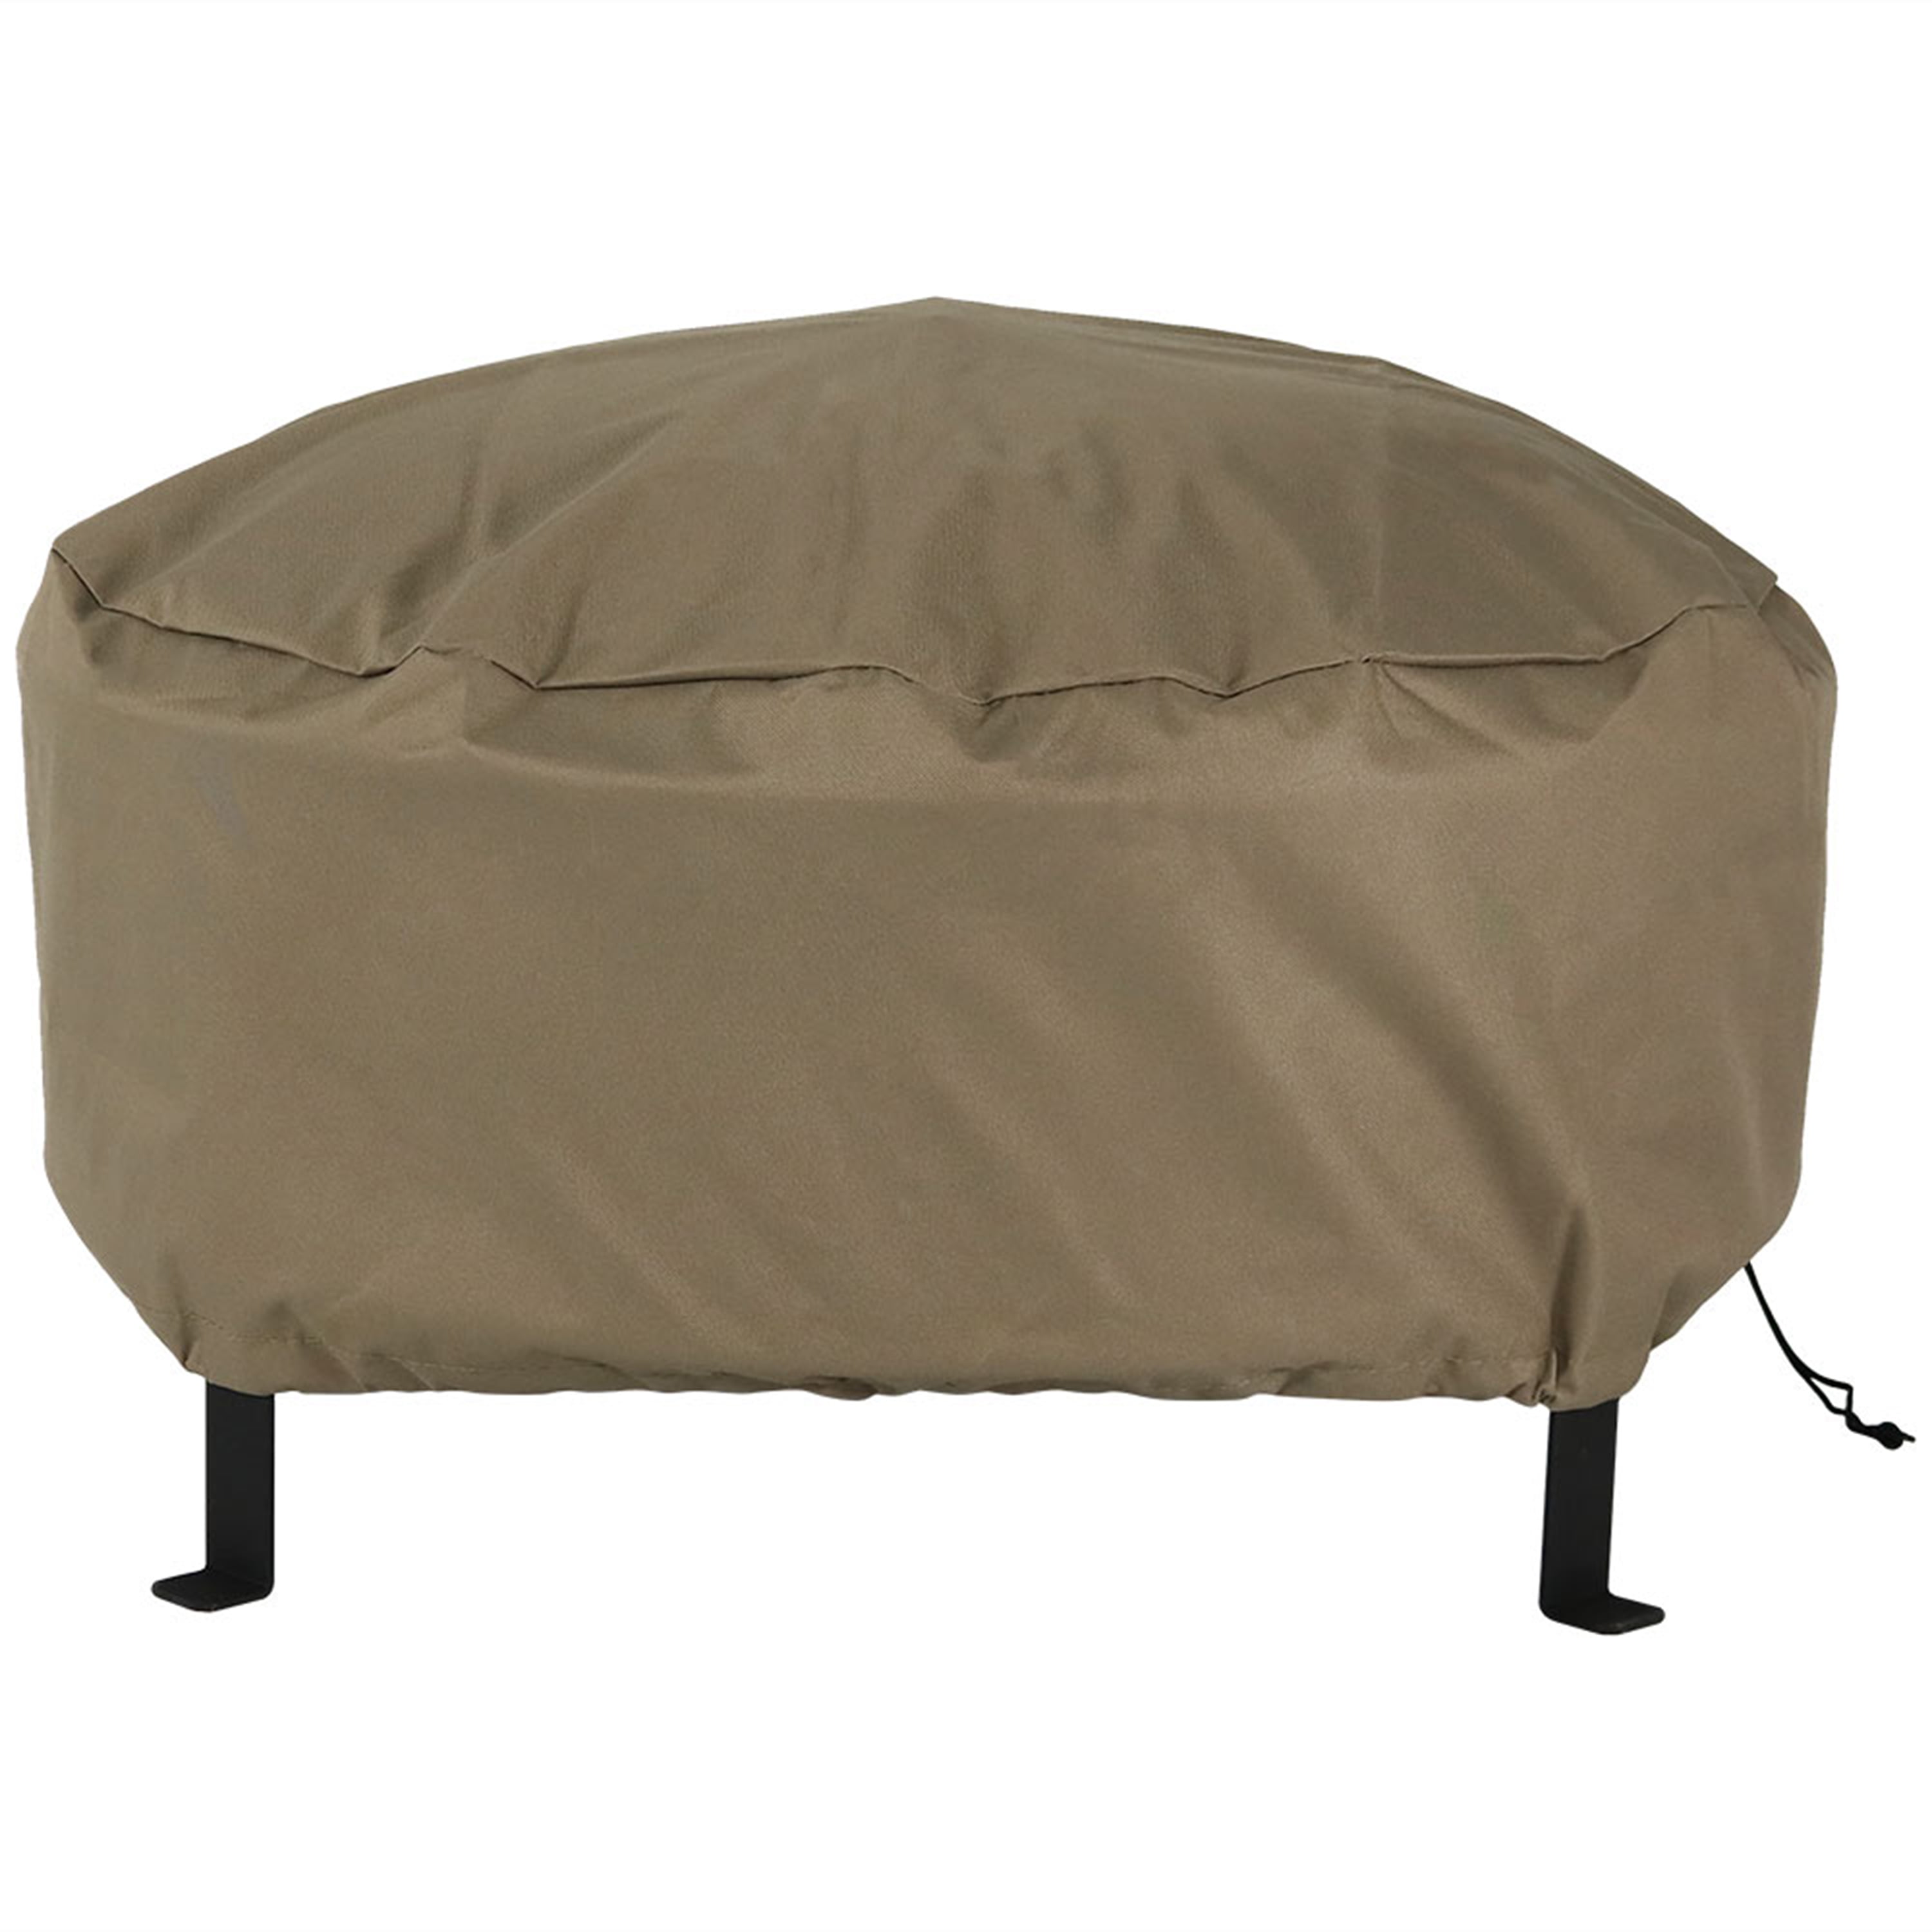 Waterproof 600D Heavy Duty Fabric with PVC Coating NEXCOVER Square Fire Pit Cover Brown. Fits Square Outdoor Fire Pit or Table 52 Lx 52 Wx 24 H Premium Patio Outdoor Cover